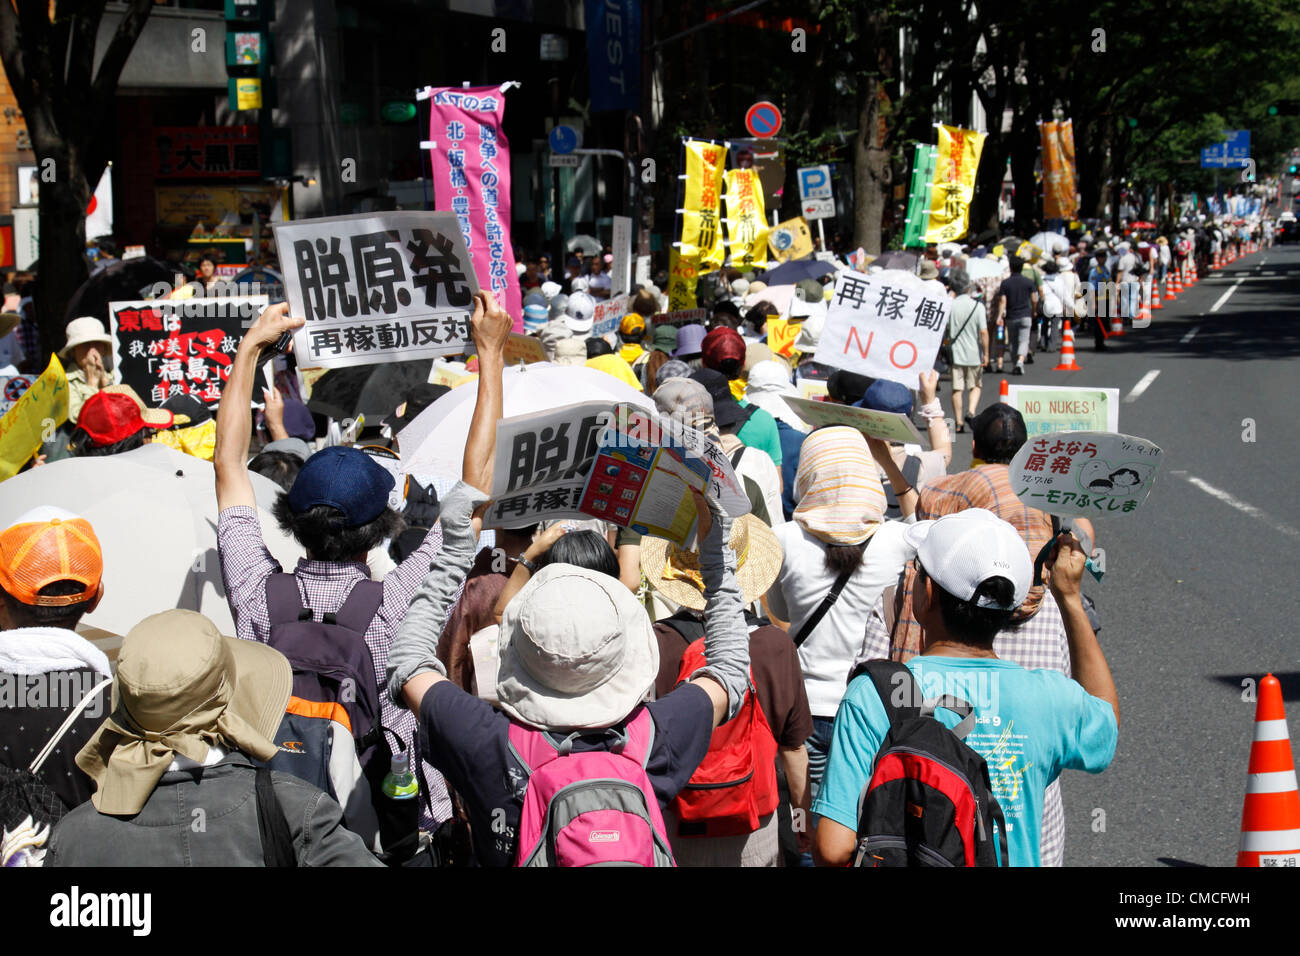 July 16, 2012, Tokyo, Japan - Protesters march on a street during an anti-nuclear rally in Tokyo on Monday, July 16, 2012. Tens of thousands of people, young and old, families and individuals packed Tokyo's Yoyogi Park for Japan's biggest anti-nuclear rally since the Fukushima disaster last year in growing protests against government moves to restart nuclear reactors. The assembly, dubbed '100,000 People's Assembly to say Goodbye to Nuclear Power Plants,' drew a crowd of around 170,000 people, according to organizers. (Photo by Hiroyuki Ozawa/AFLO) [2178] -ty- Stock Photo